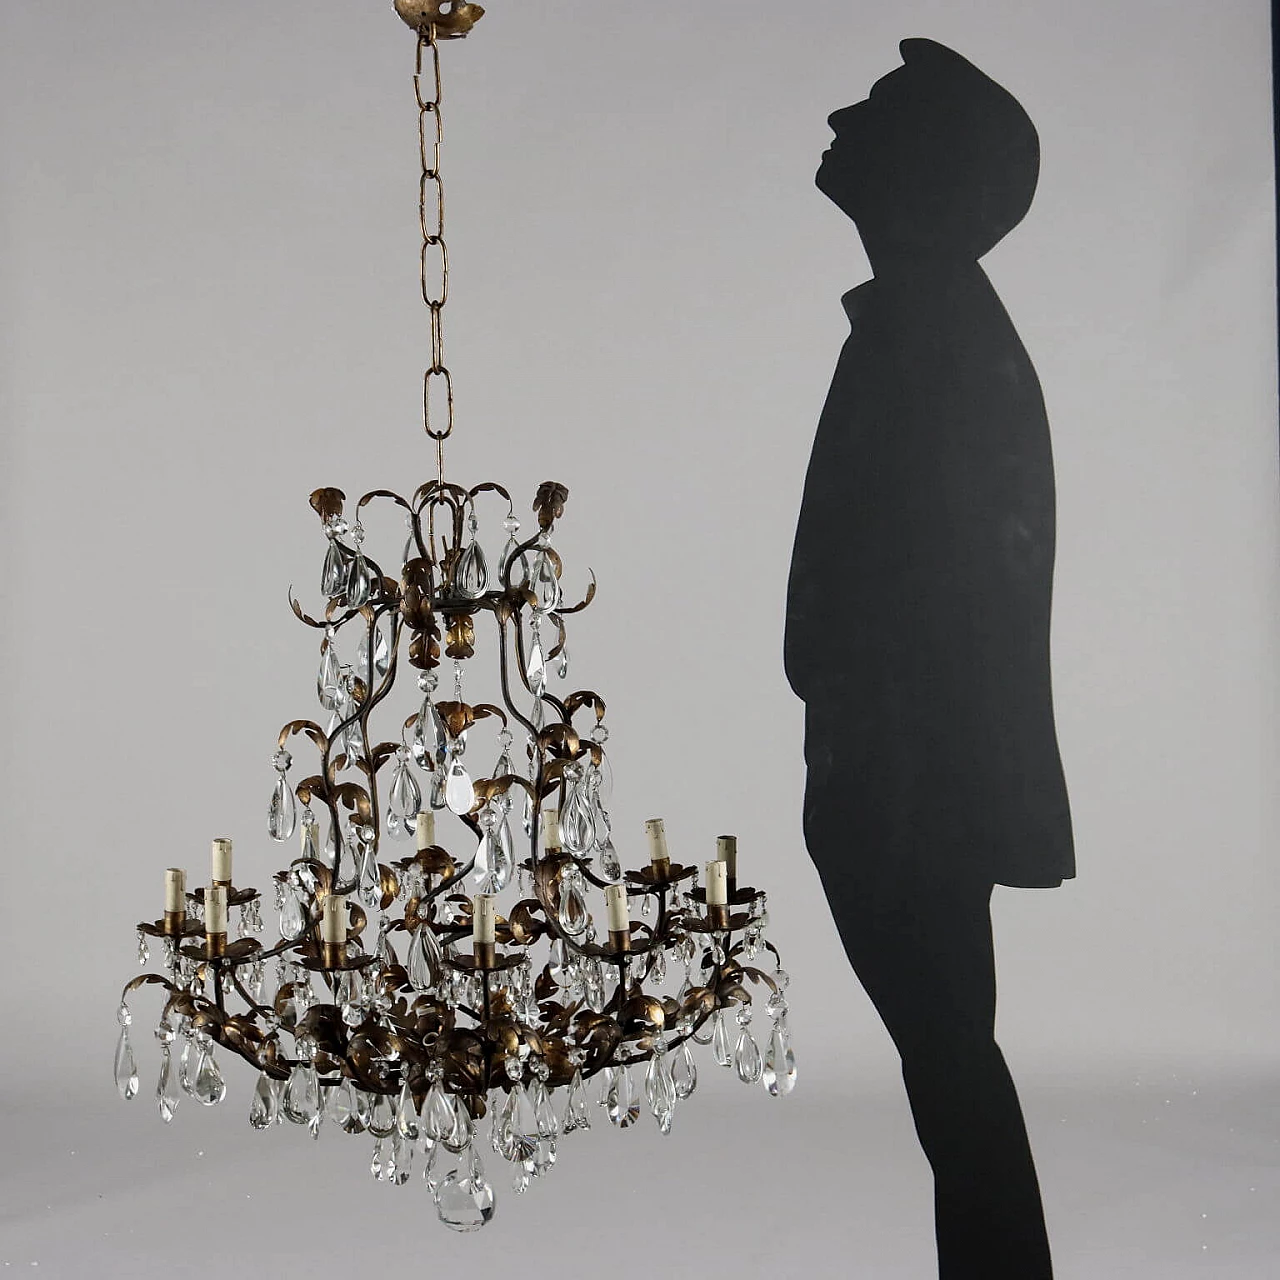 12-light chandelier made of sheet metal and glass pendants 2